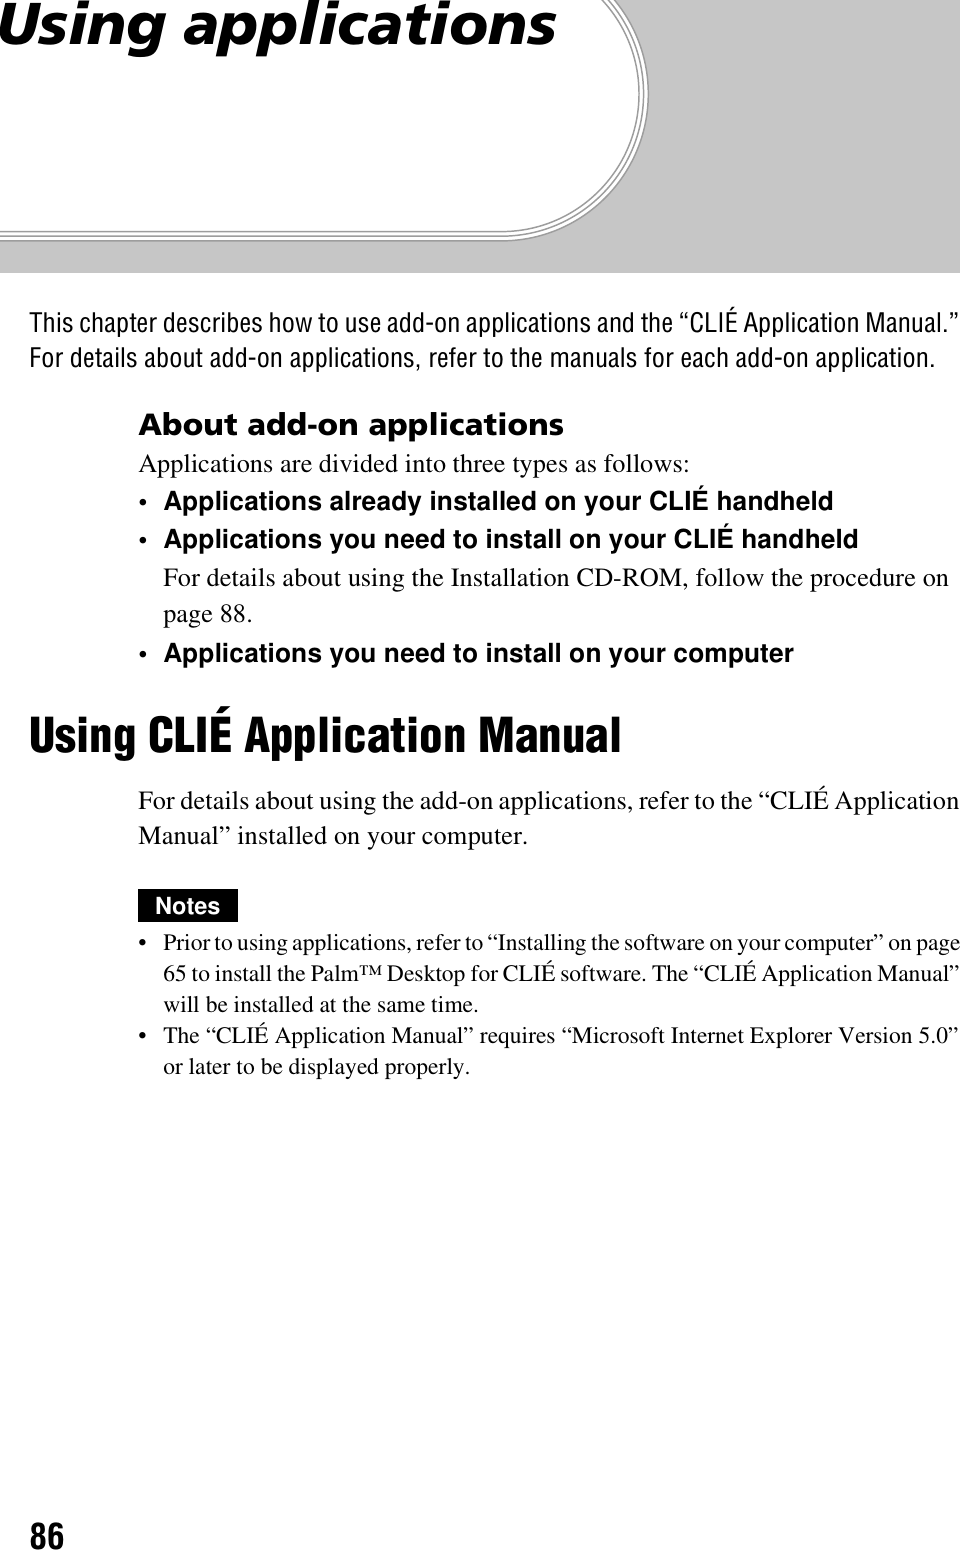 86Using applicationsThis chapter describes how to use add-on applications and the “CLIÉ Application Manual.” For details about add-on applications, refer to the manuals for each add-on application.About add-on applicationsApplications are divided into three types as follows:• Applications already installed on your CLIÉ handheld• Applications you need to install on your CLIÉ handheldFor details about using the Installation CD-ROM, follow the procedure on page 88.• Applications you need to install on your computerUsing CLIÉ Application ManualFor details about using the add-on applications, refer to the “CLIÉ Application Manual” installed on your computer.Notes• Prior to using applications, refer to “Installing the software on your computer” on page 65 to install the Palm™ Desktop for CLIÉ software. The “CLIÉ Application Manual” will be installed at the same time.• The “CLIÉ Application Manual” requires “Microsoft Internet Explorer Version 5.0” or later to be displayed properly.